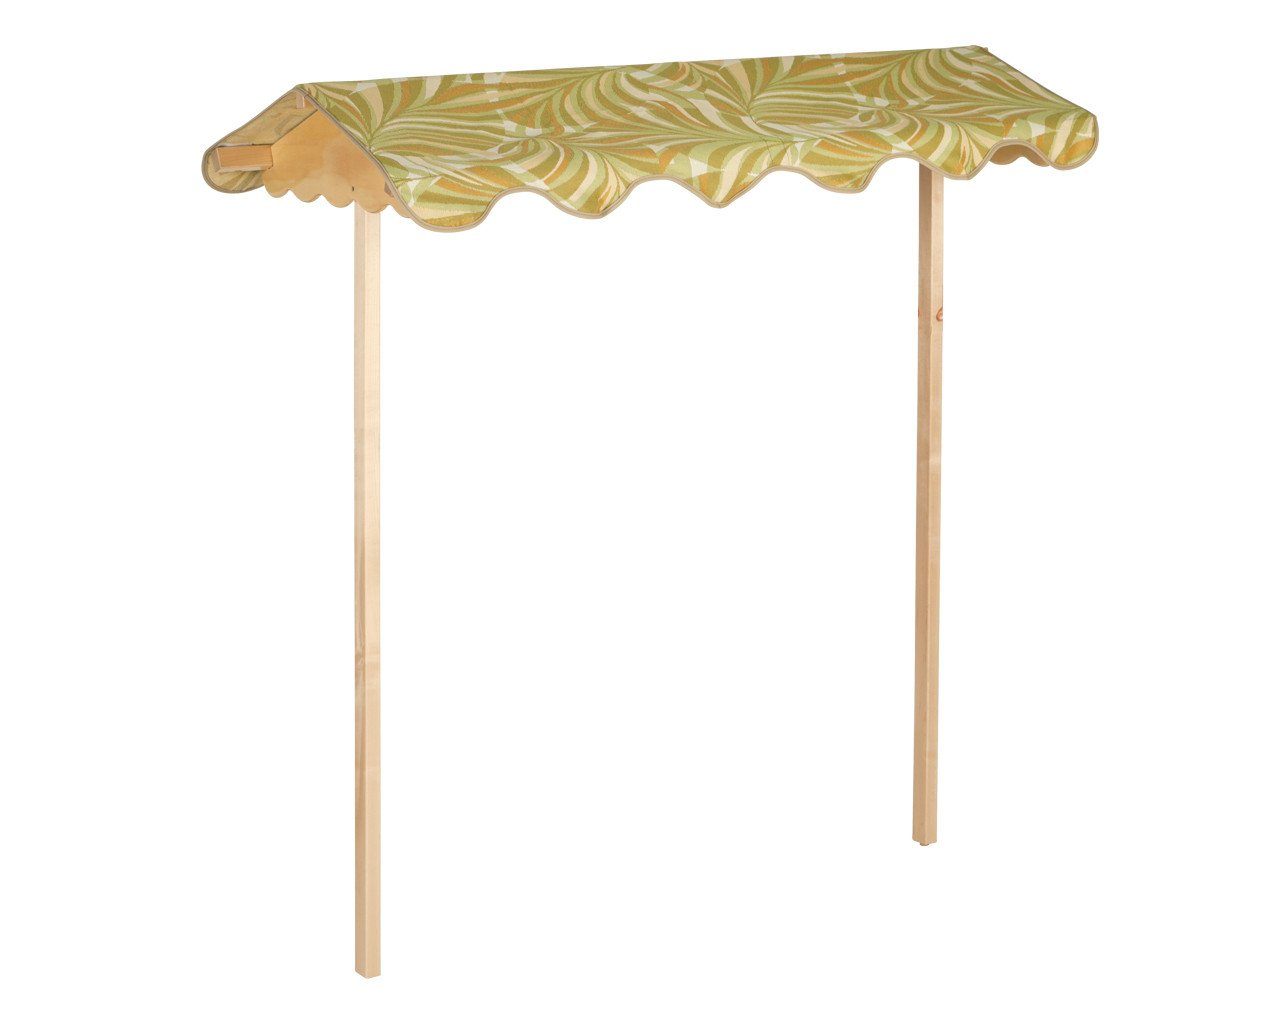 Community Playthings Roomscapes Canopy - louisekool